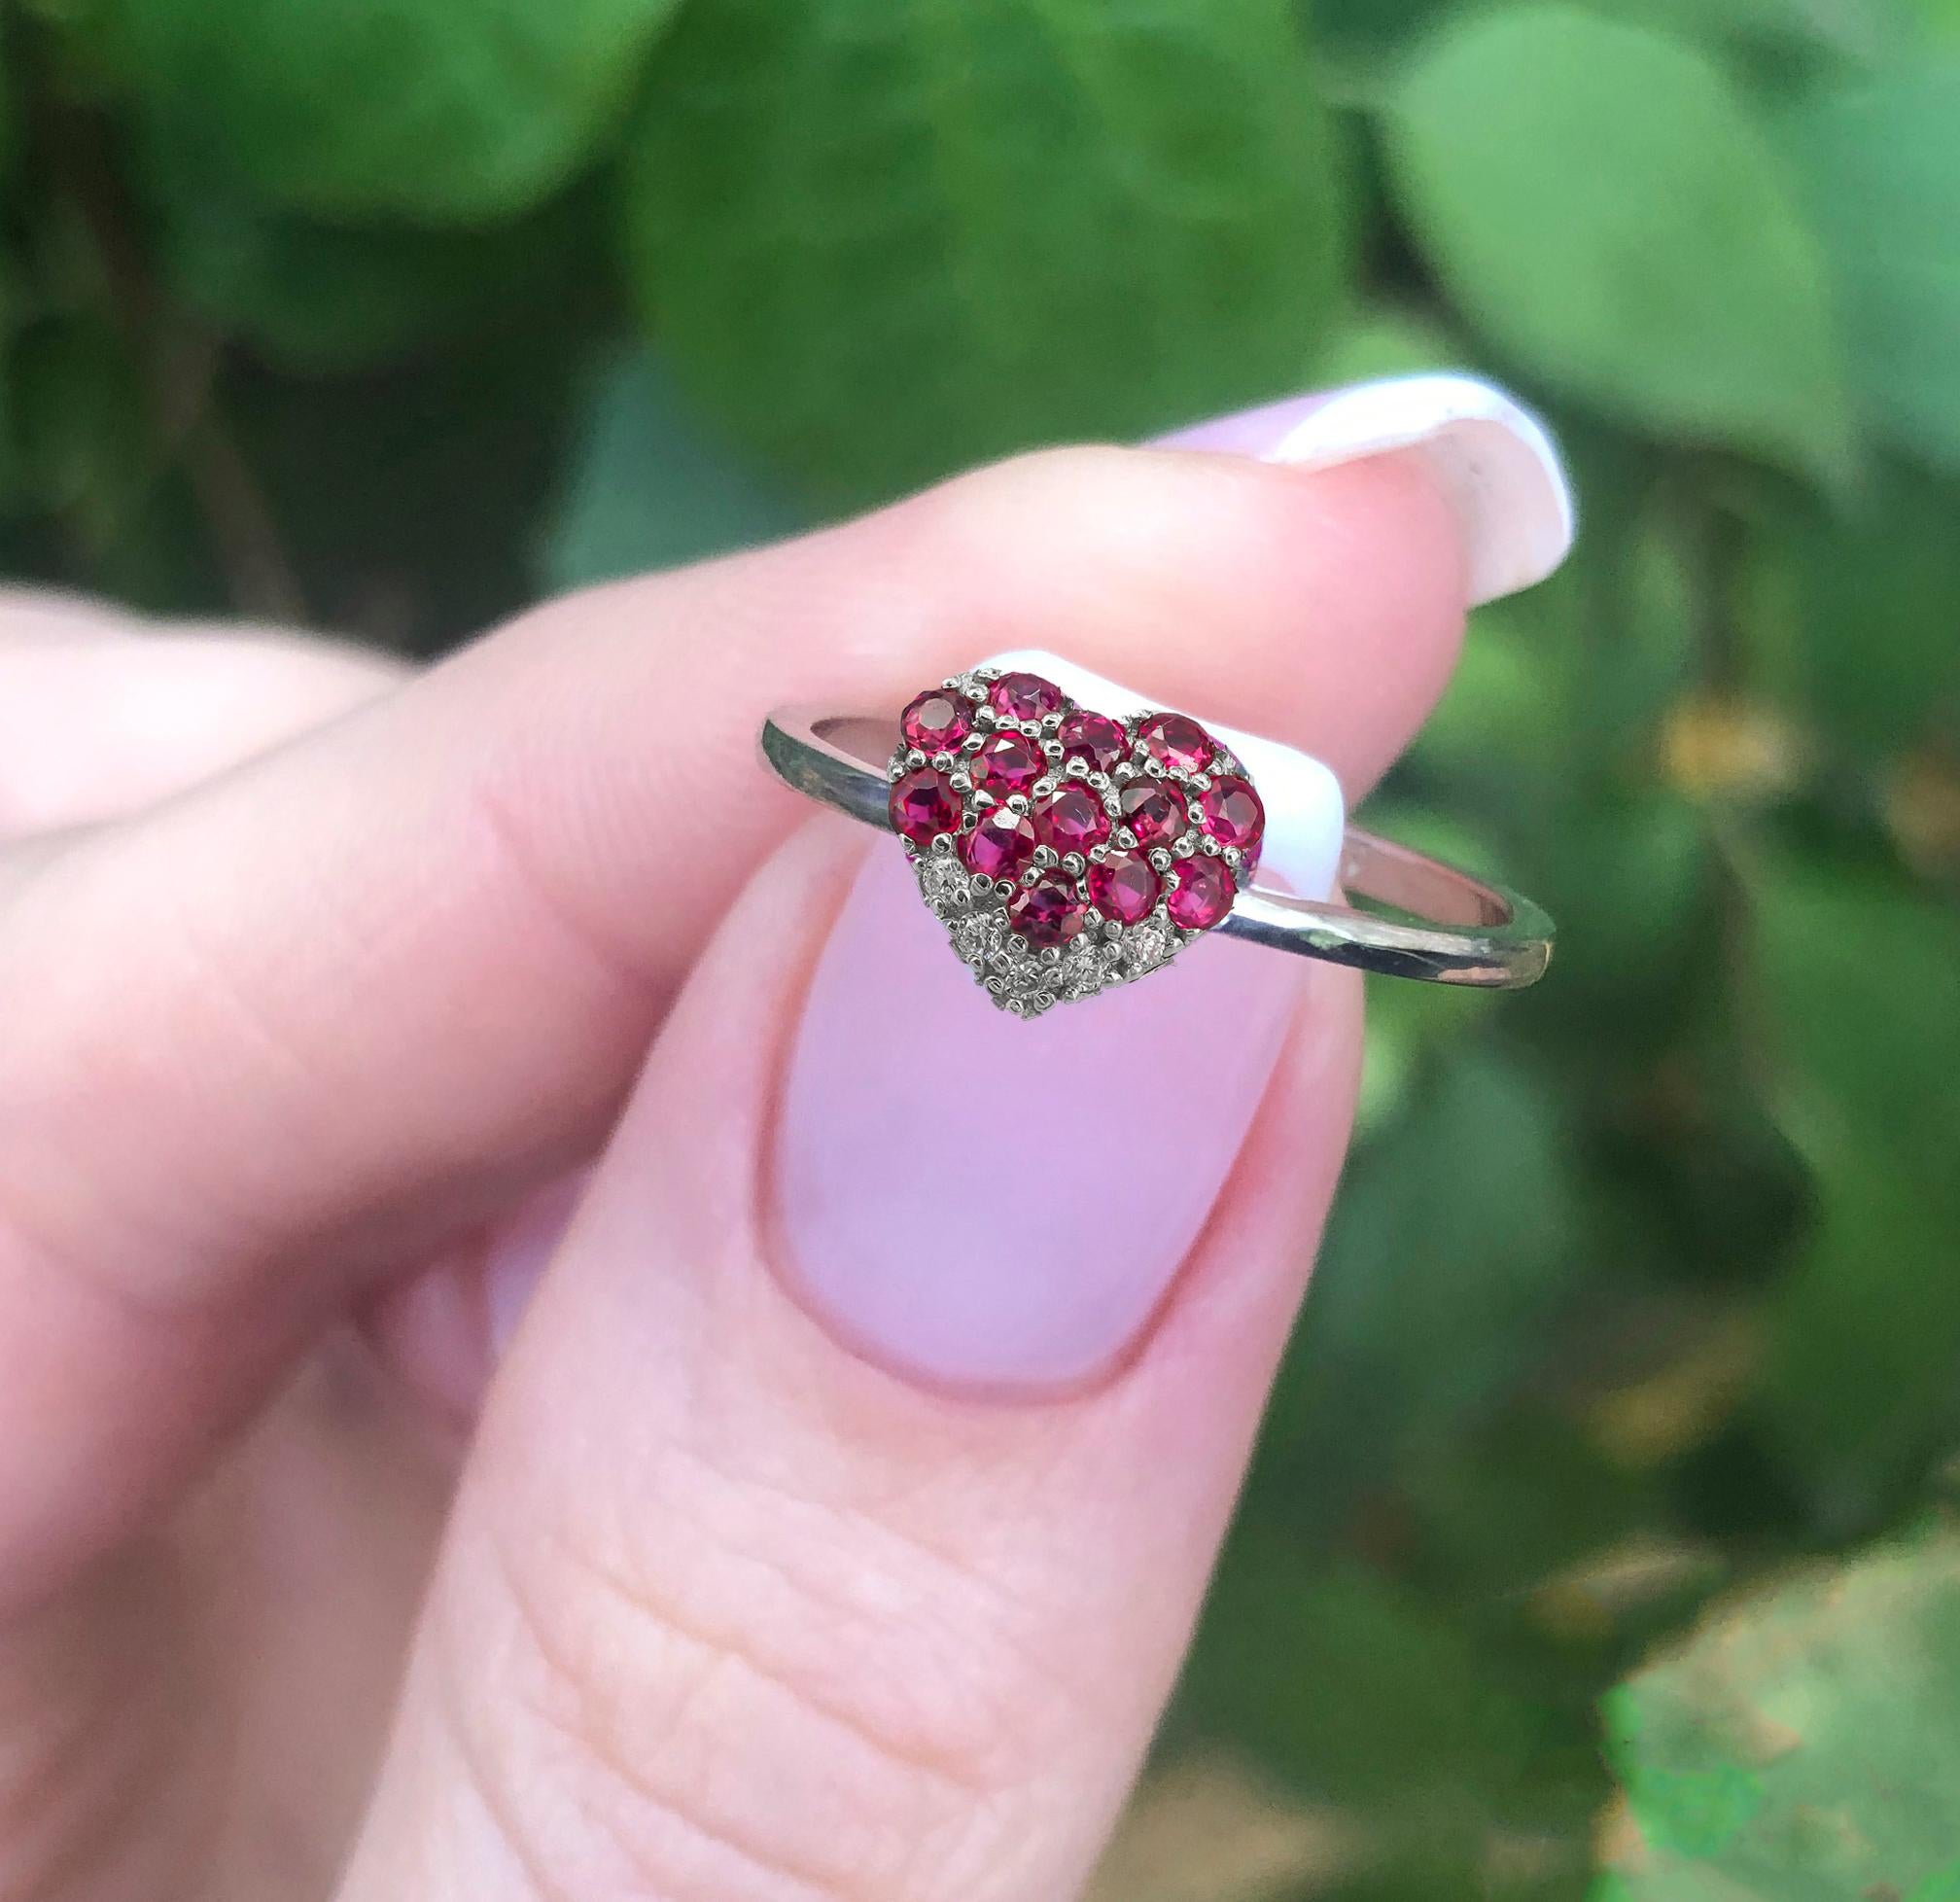 For Sale:  14 karat Gold Ring with Diamonds and Rubies. Heart Gold Ring. Love ring. 2